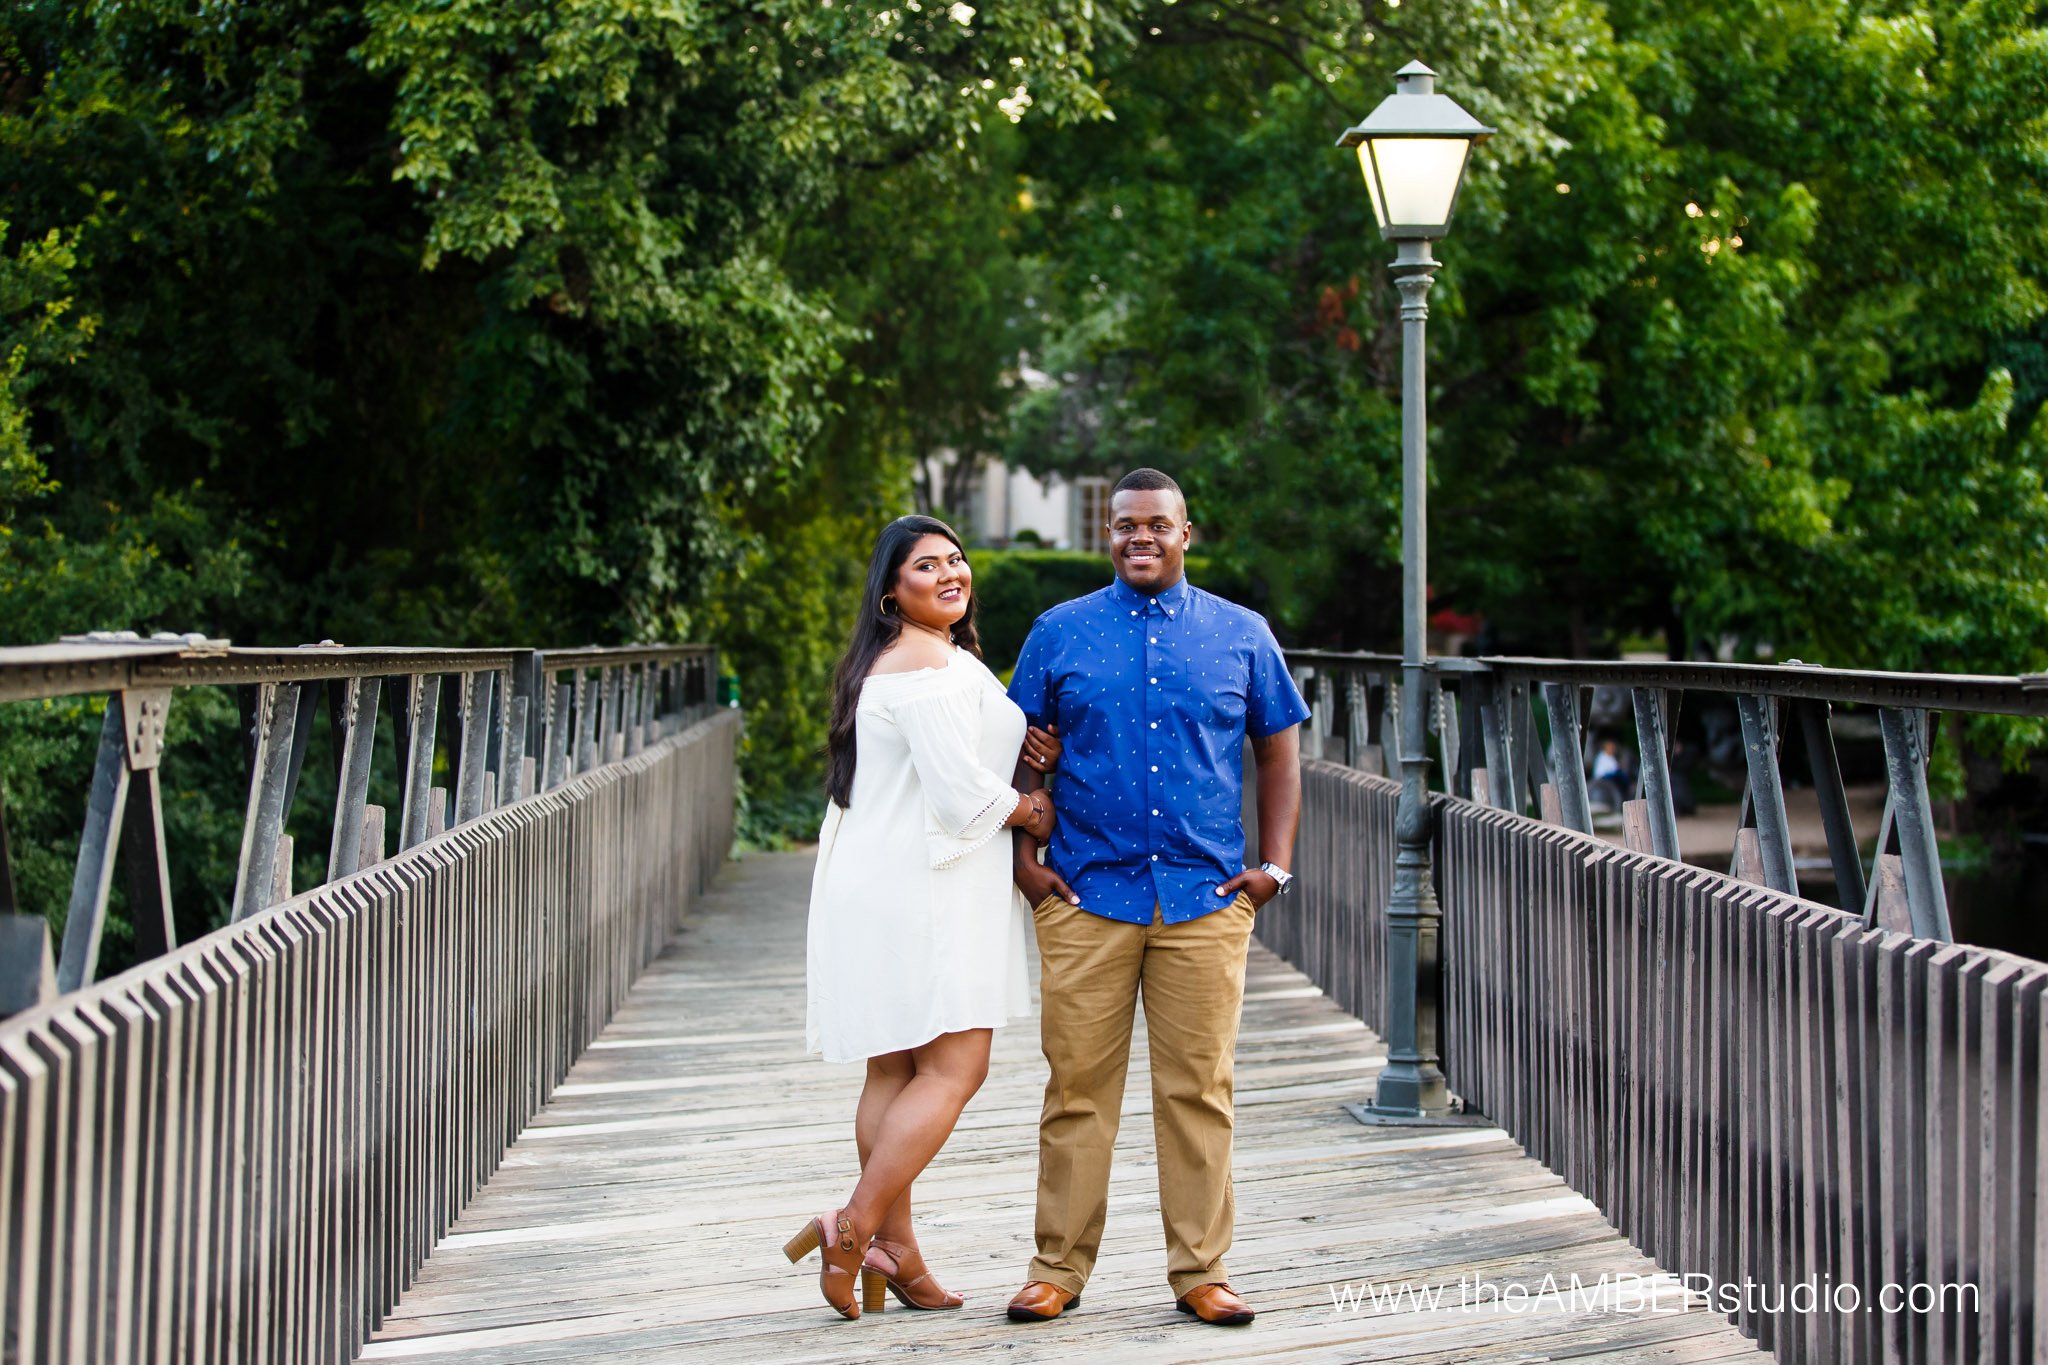 Interracial couple at their Dallas engagement session at Lakeside Park on the bridge.